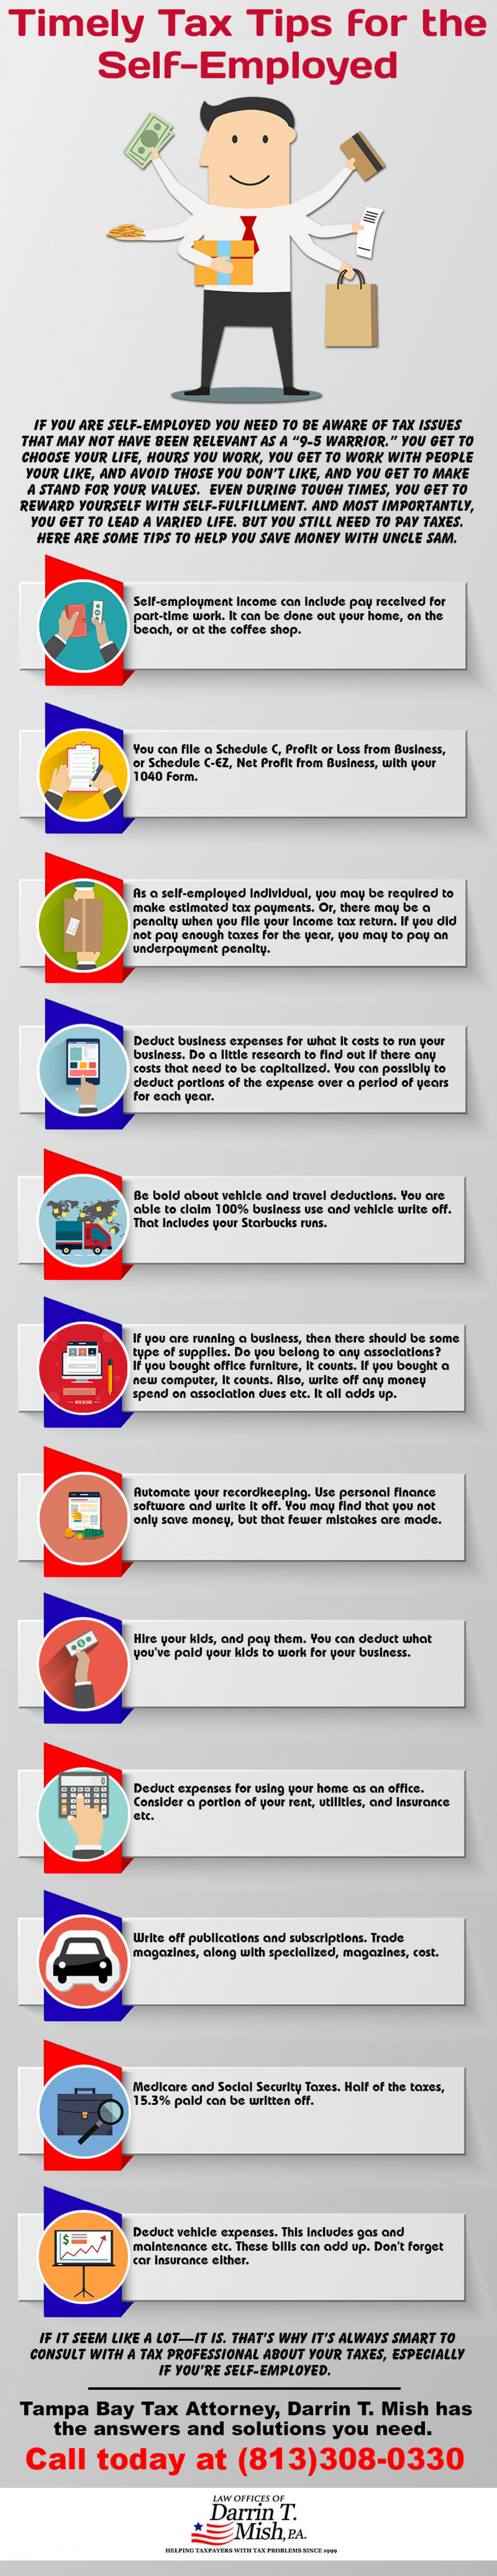 Timely Tax Tips for the Self Employed Infographic